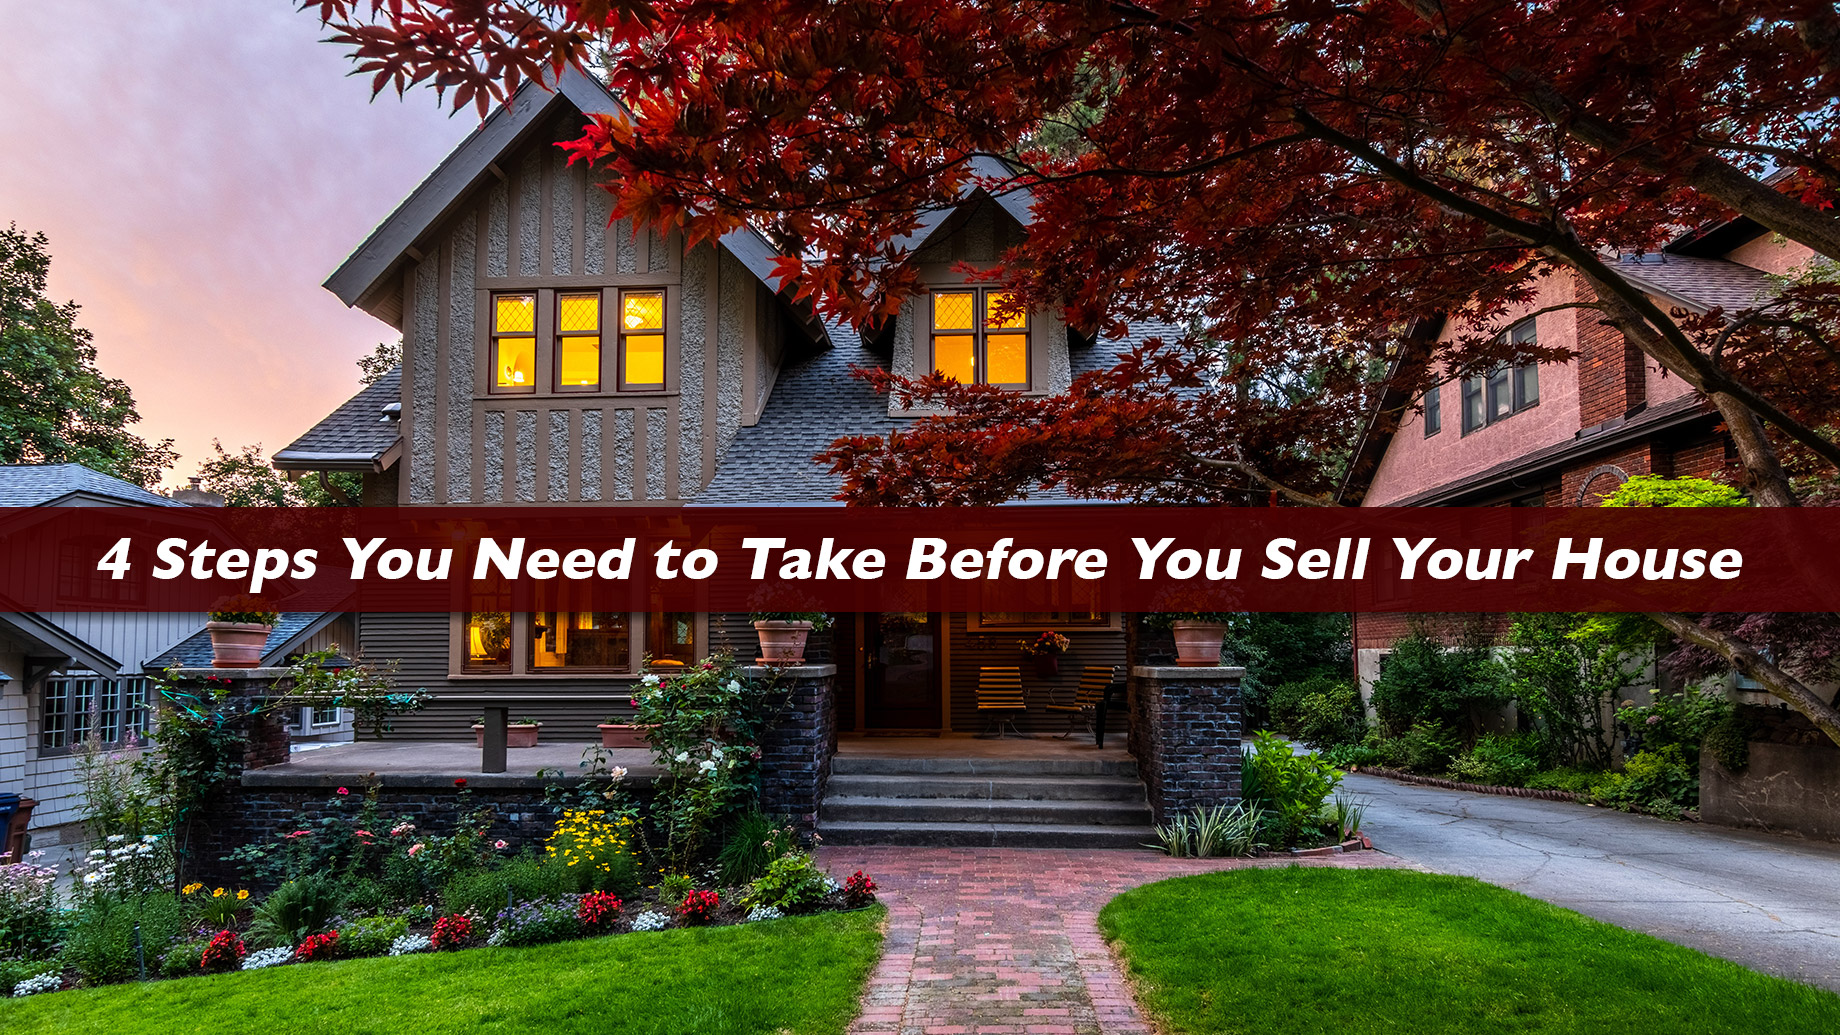 4 Steps You Need to Take Before You Sell Your House